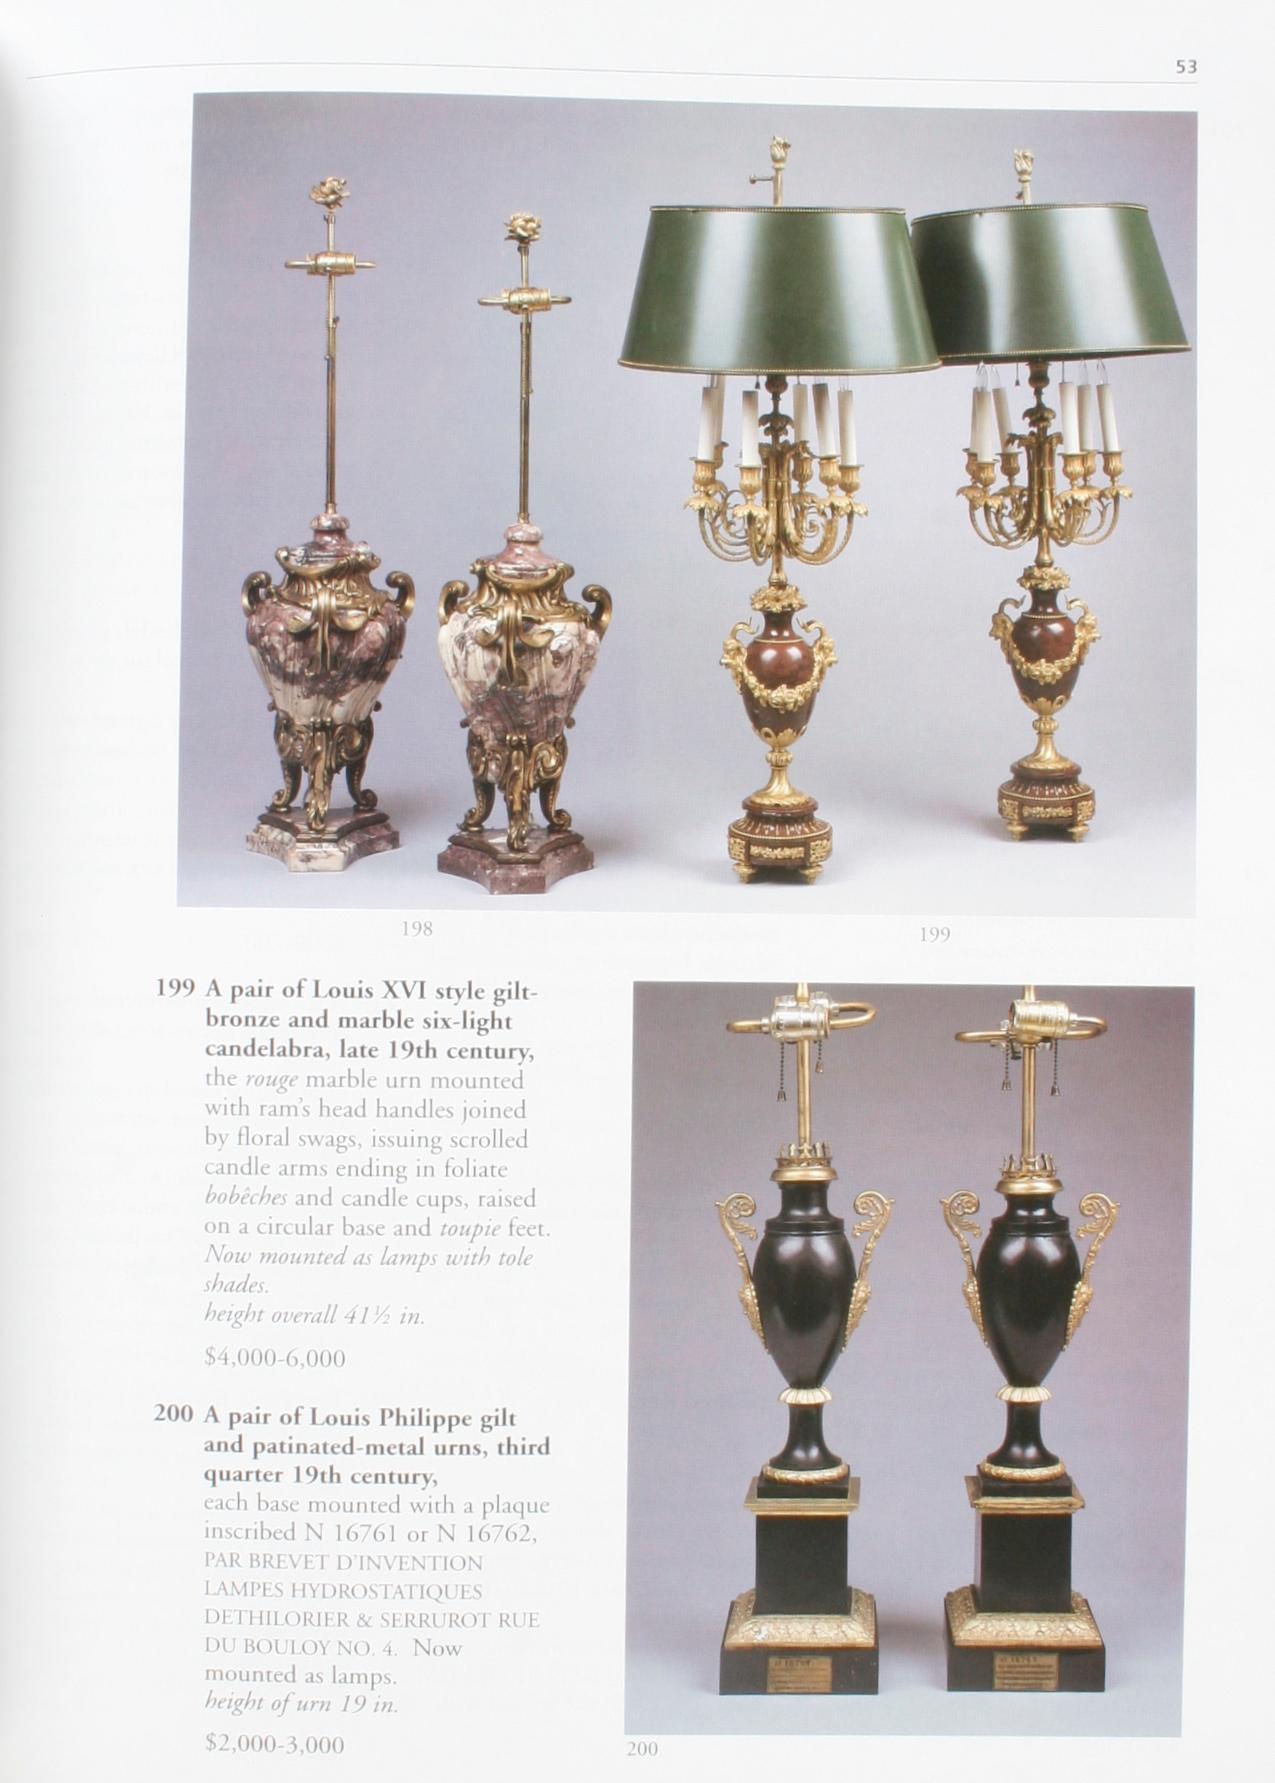 Sotheby's: French Furniture, Works of Art and Paintings, Mary & E.R. Albert Jr 2